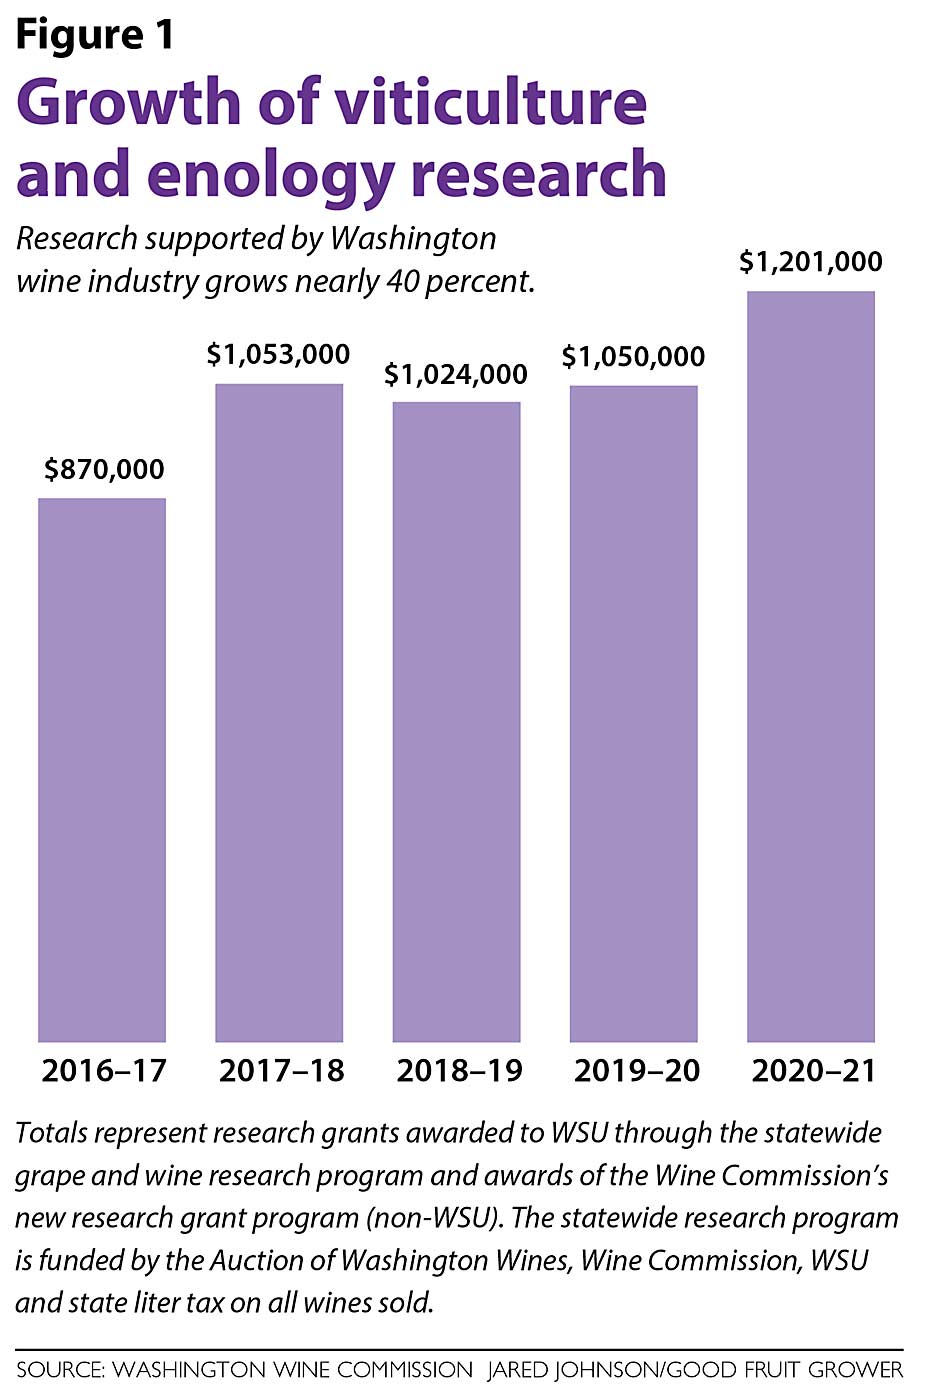 This chart shows the growth of viticulture and enology research at Washington State University from 2016 to 2021. (Source: Washington Wine Commission, Graphic: Jared Johnson/Good Fruit Grower)